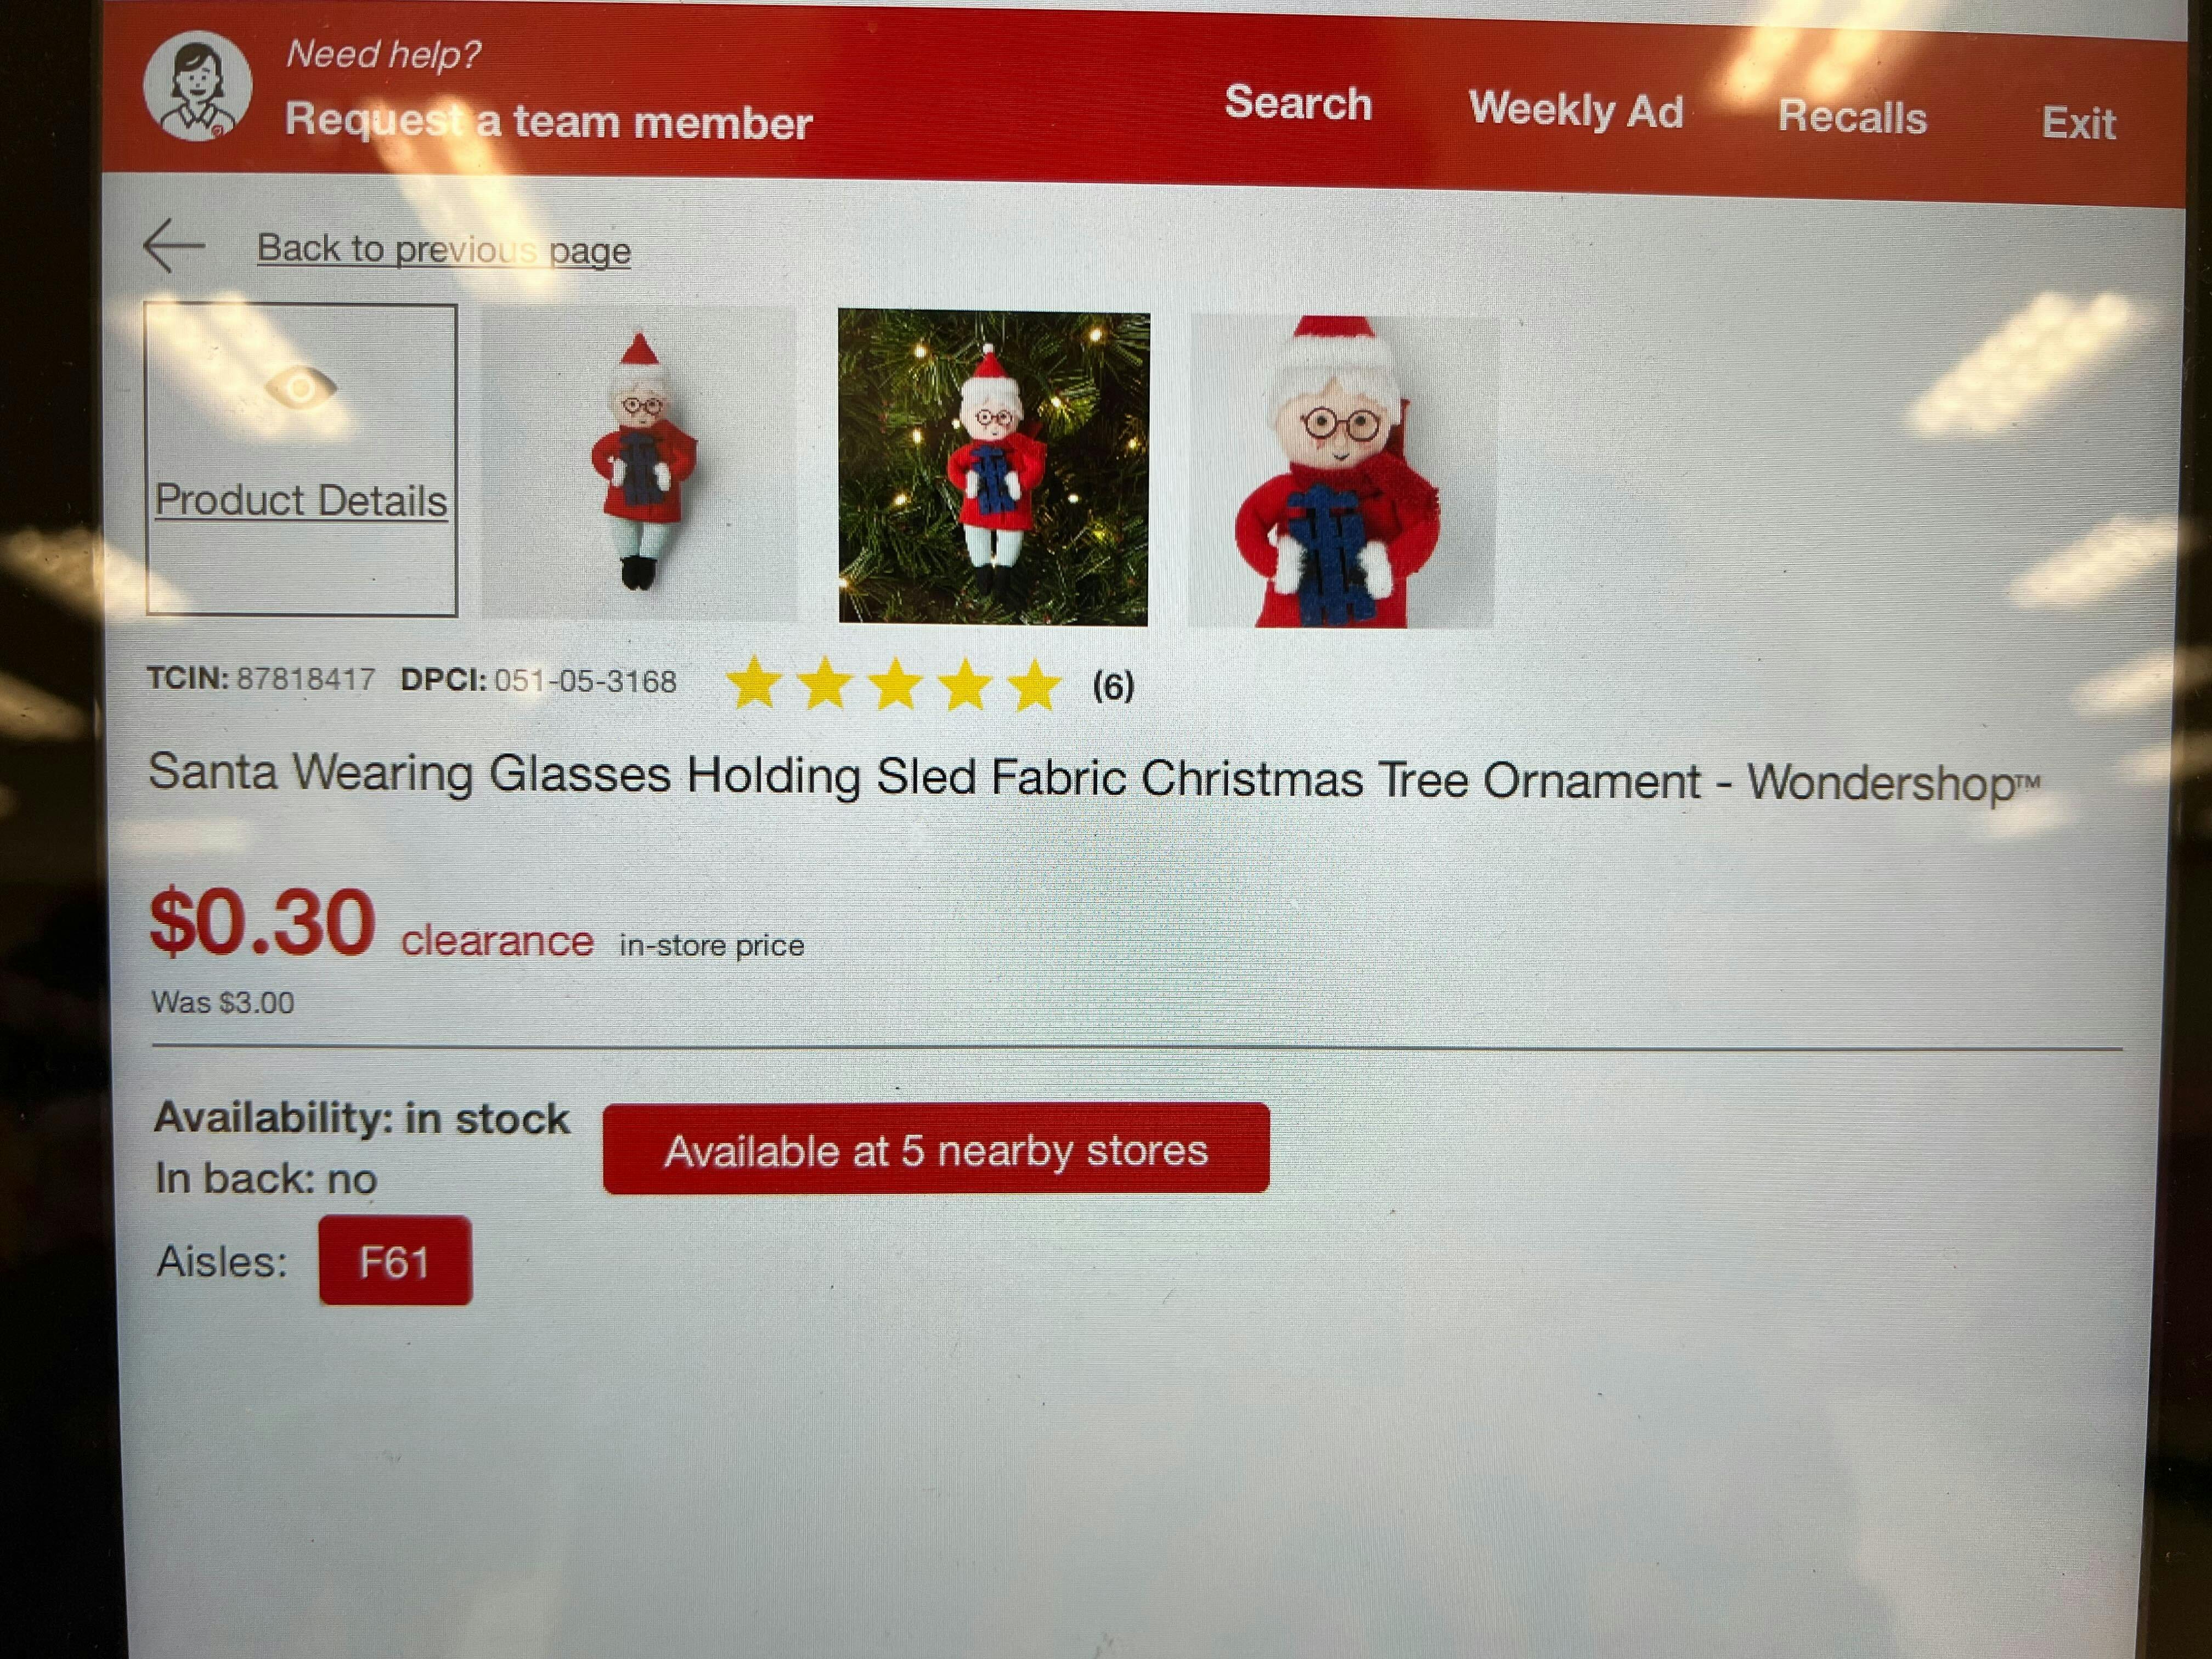 https://content-images.thekrazycouponlady.com/nie44ndm9bqr/1YQhQrZtb8VgwpM0lE7izx/032dd6d82f515c107ffe46d4a914af36/christmas-clearance-90-target.jpg